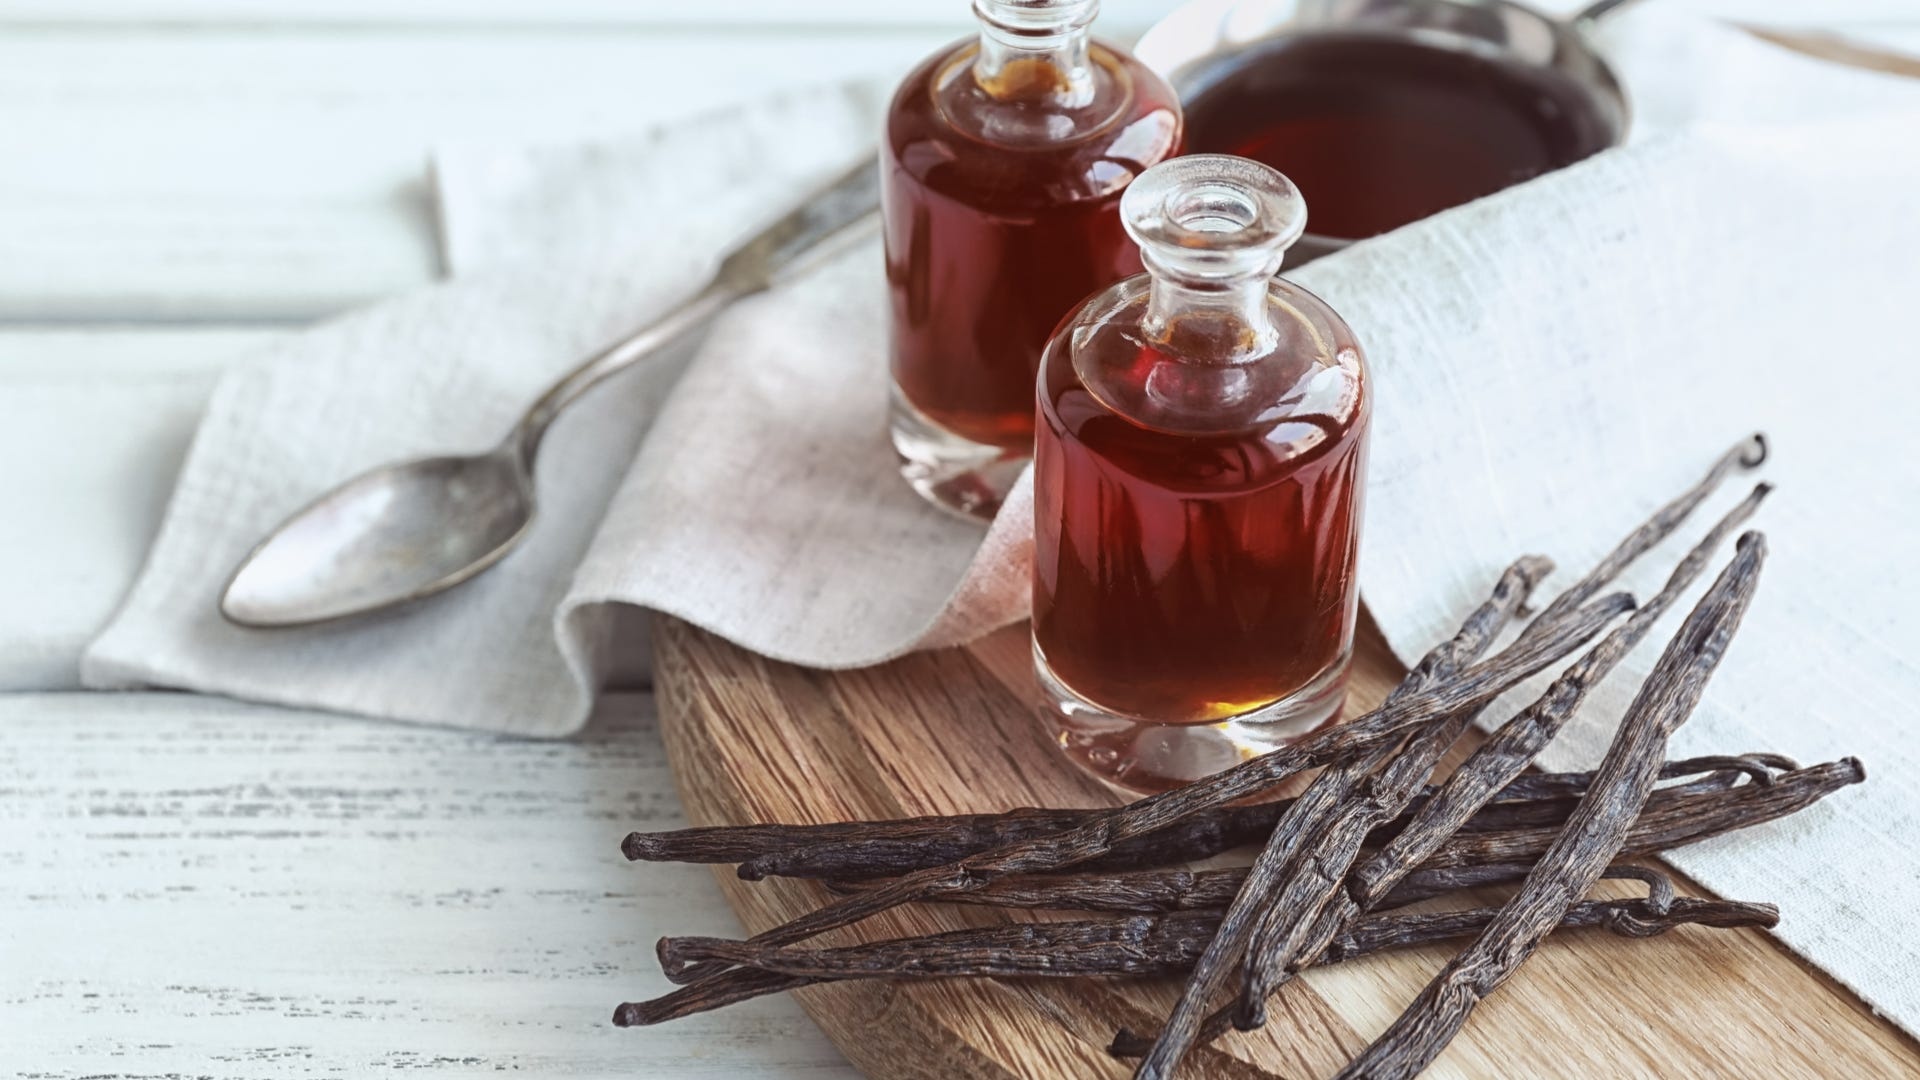 Vanilla bean or extract, How to decide, Use, Lifesavvy, 1920x1080 Full HD Desktop